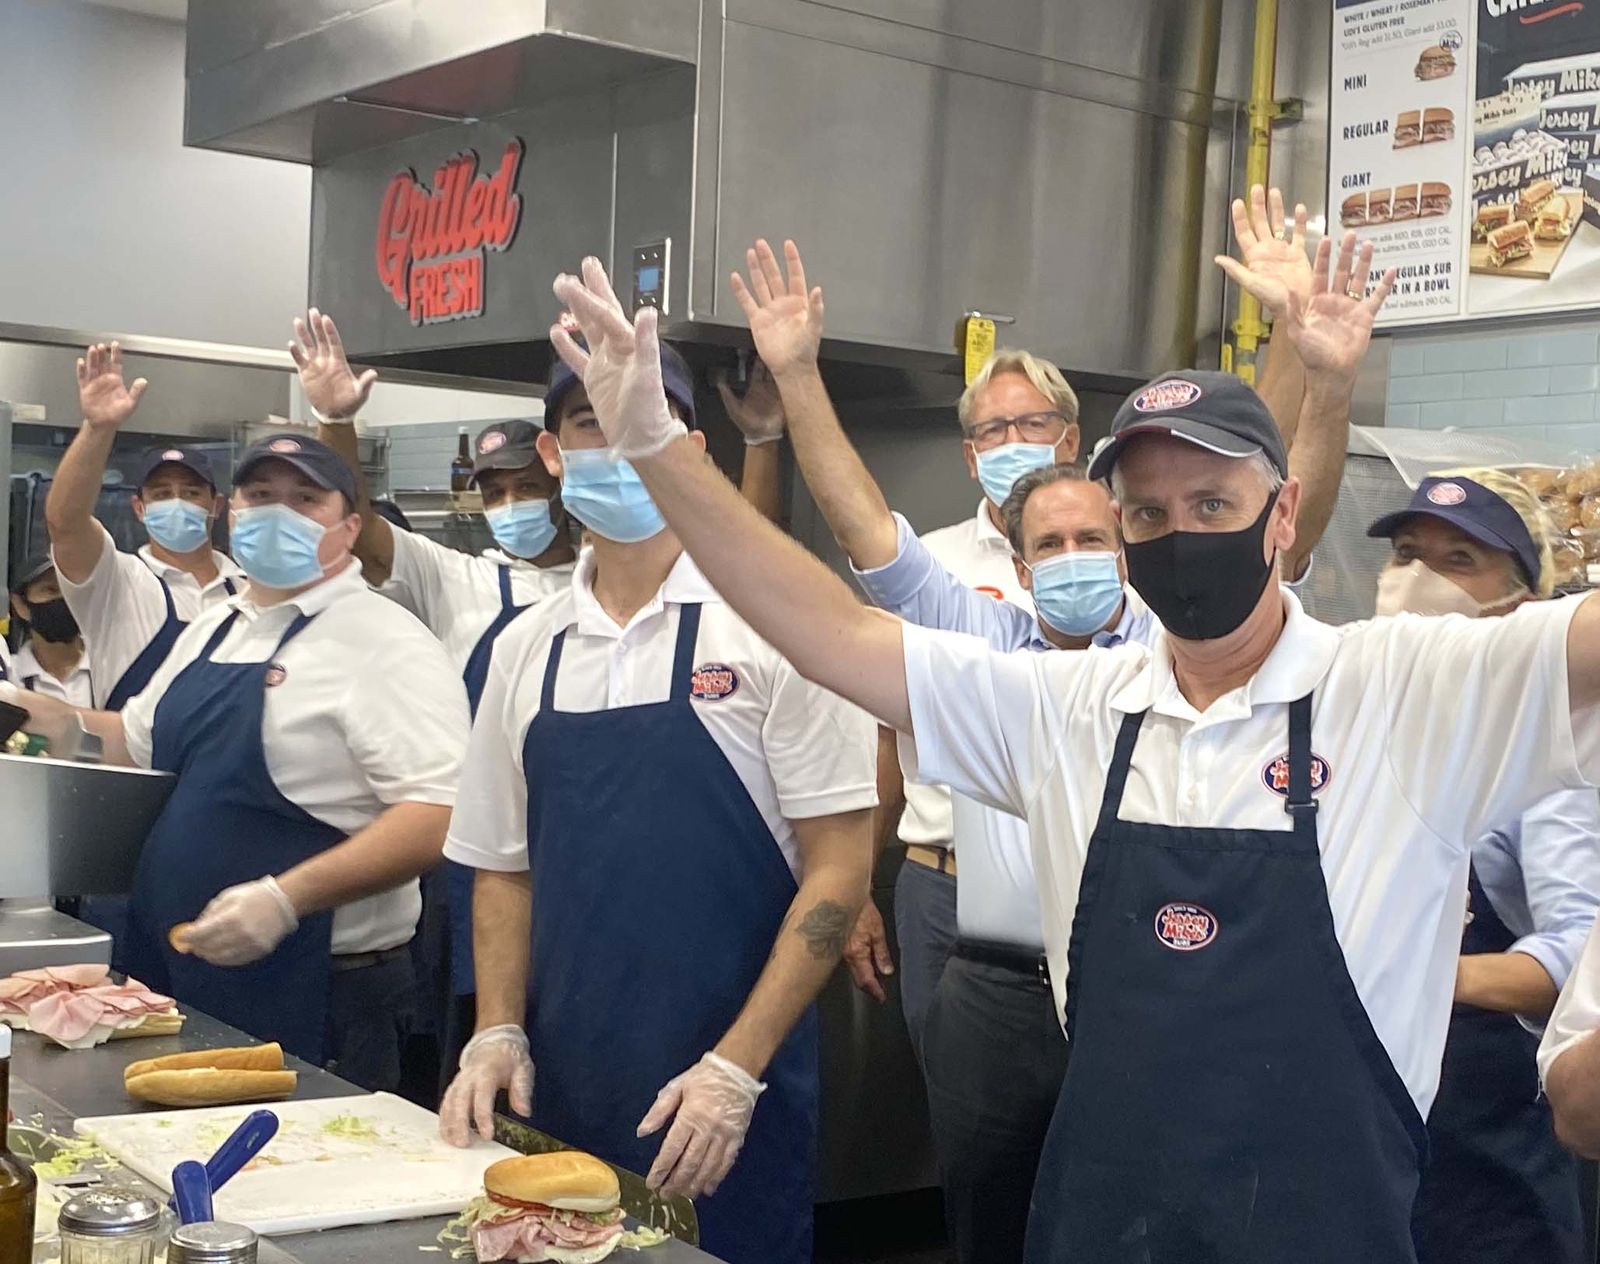 Jersey Mike's Subs Announces OVER $15 MILLION RAISED For Local Charities Nationwide in March